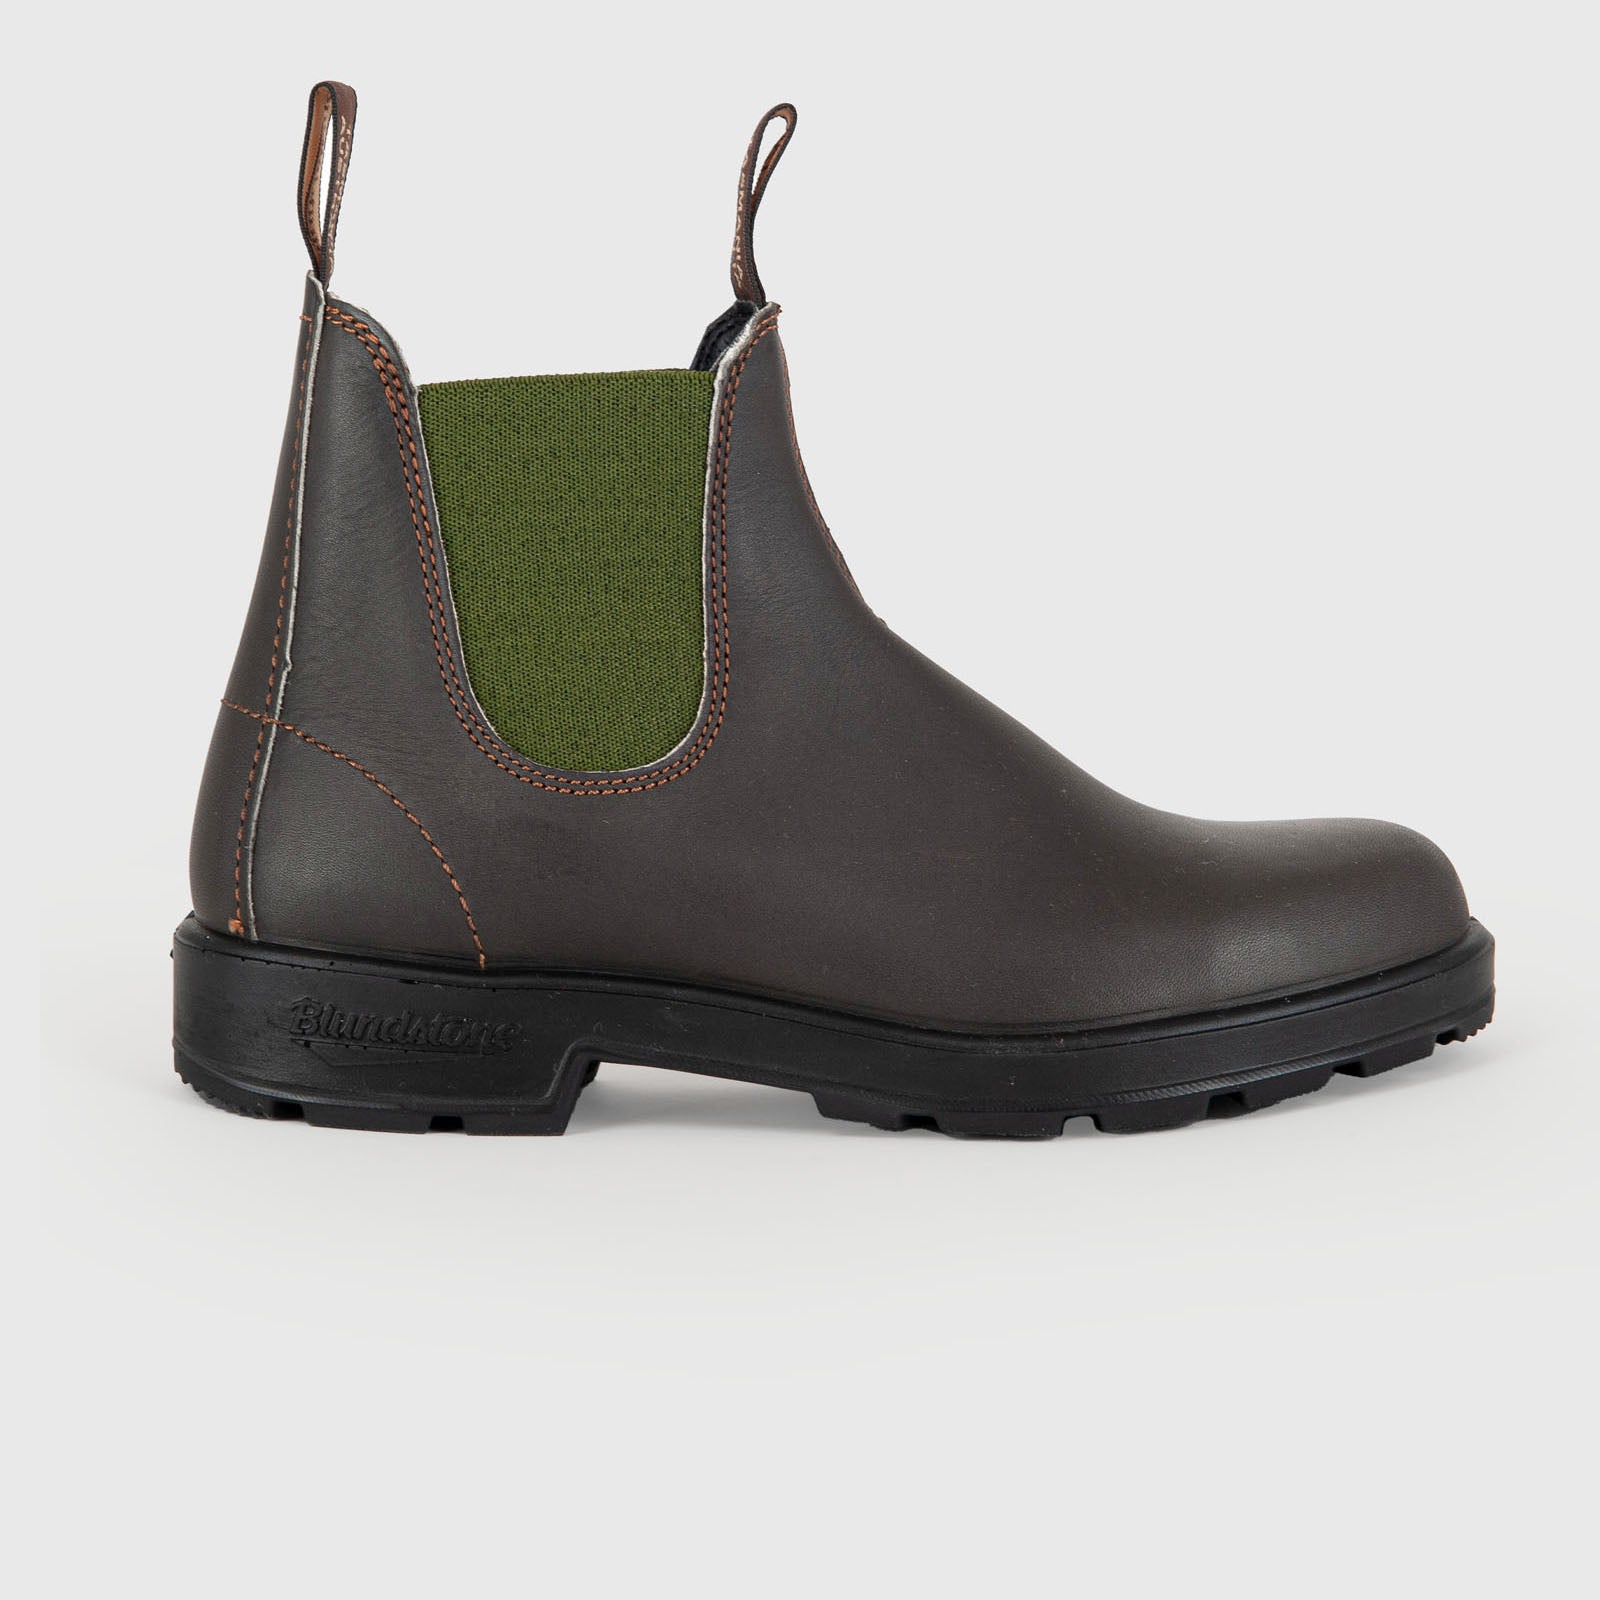 Blundstone Stivaletto Beatle 519 Pelle Stout Brown/Olive - 8